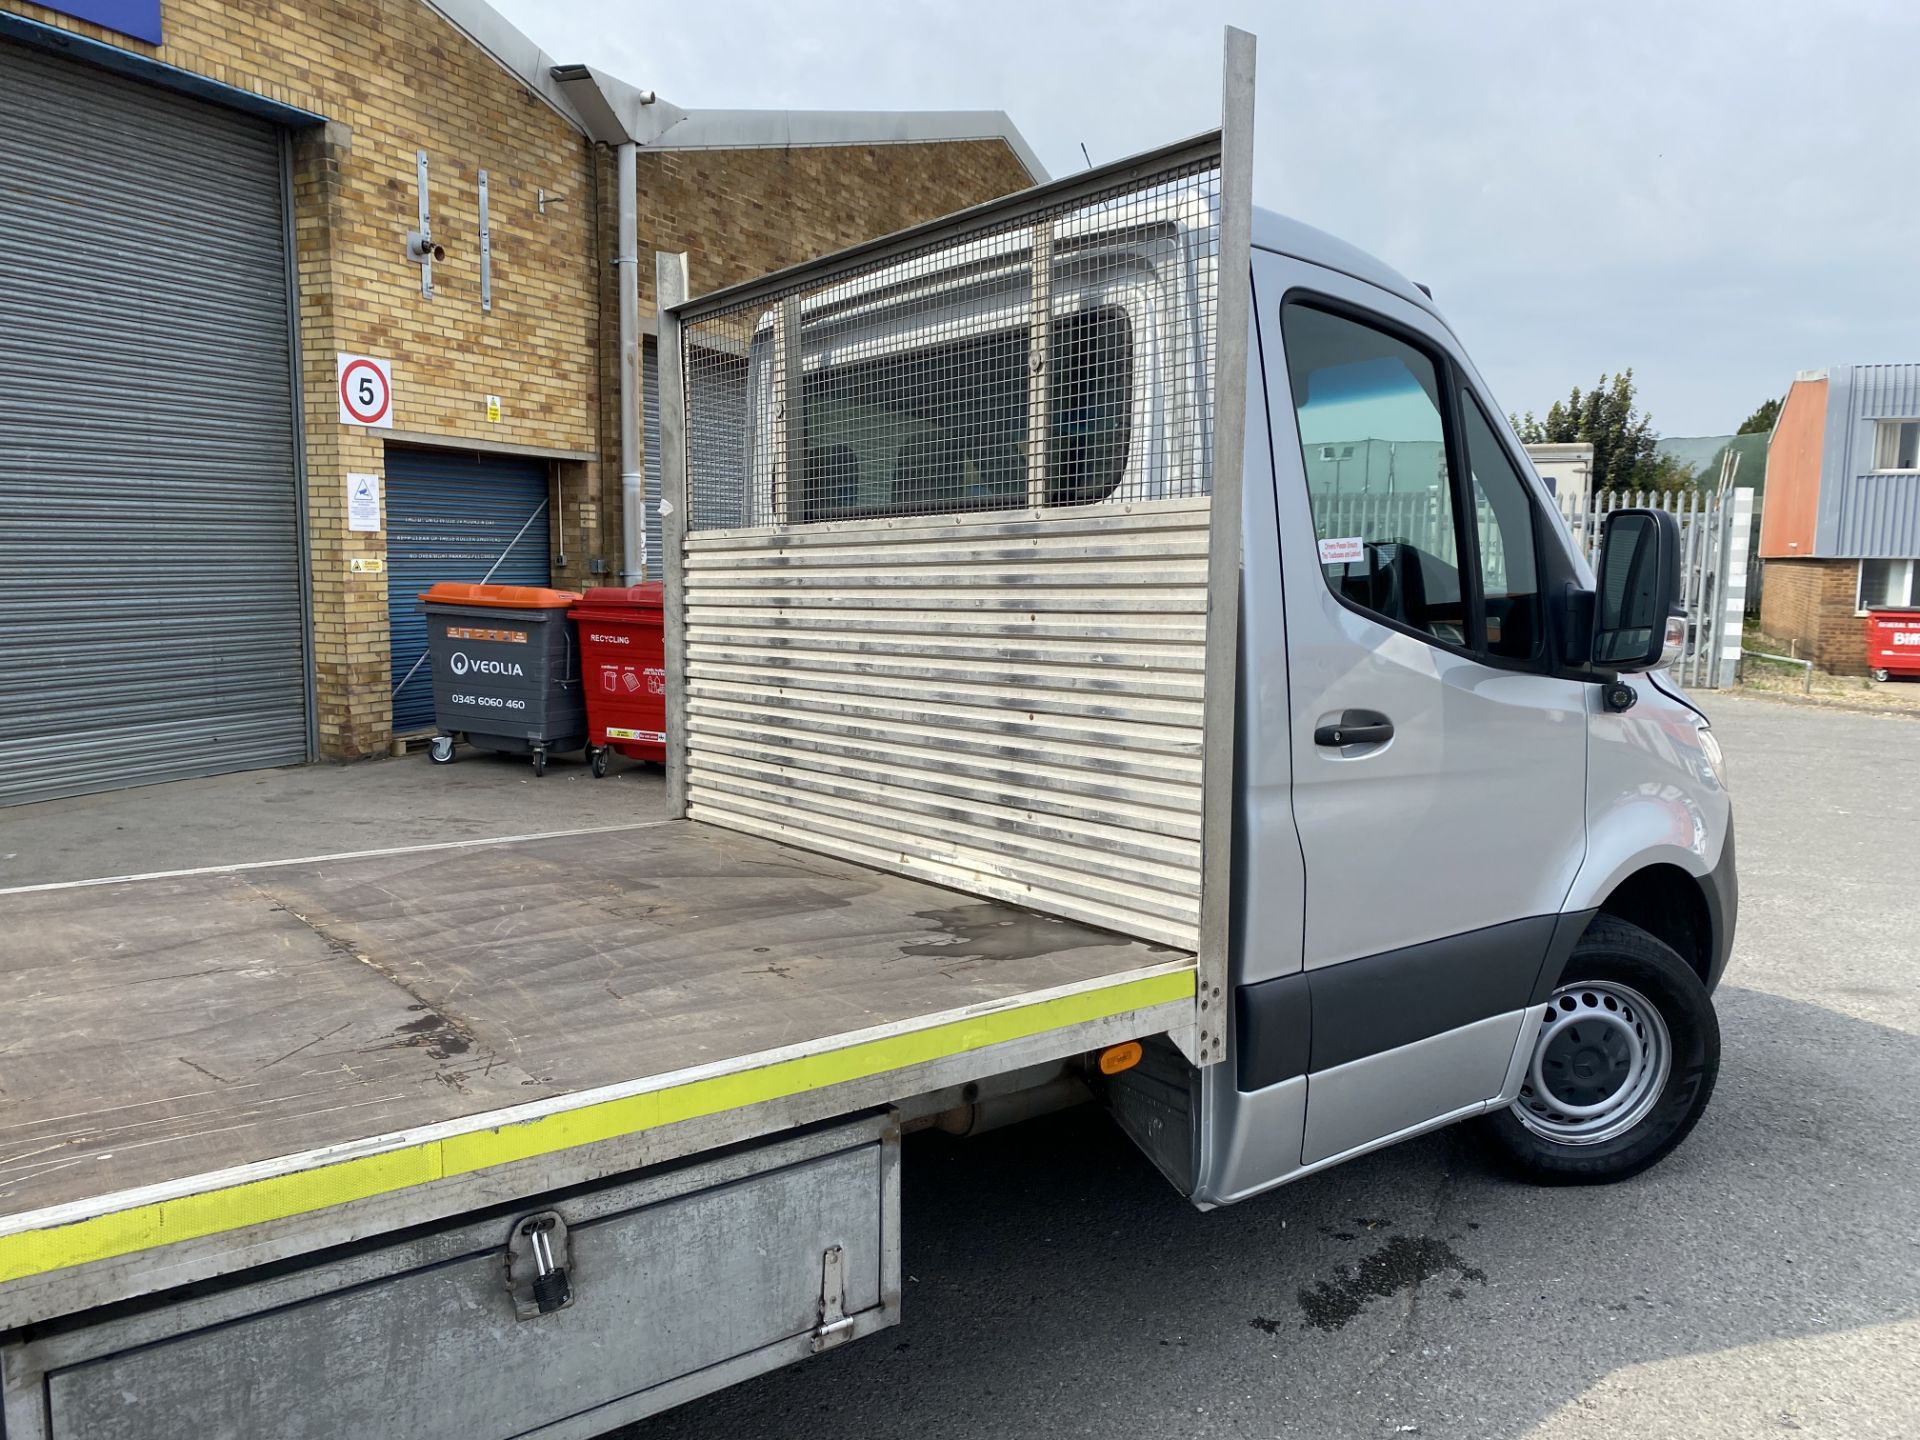 2019 MERCEDES BENZ SPRINTER 316 2.1 CDI L3 DIESEL RWD 3.5T CHASSIS CAB ALUMINIUM FLAT EXTRA LONG - Image 6 of 30